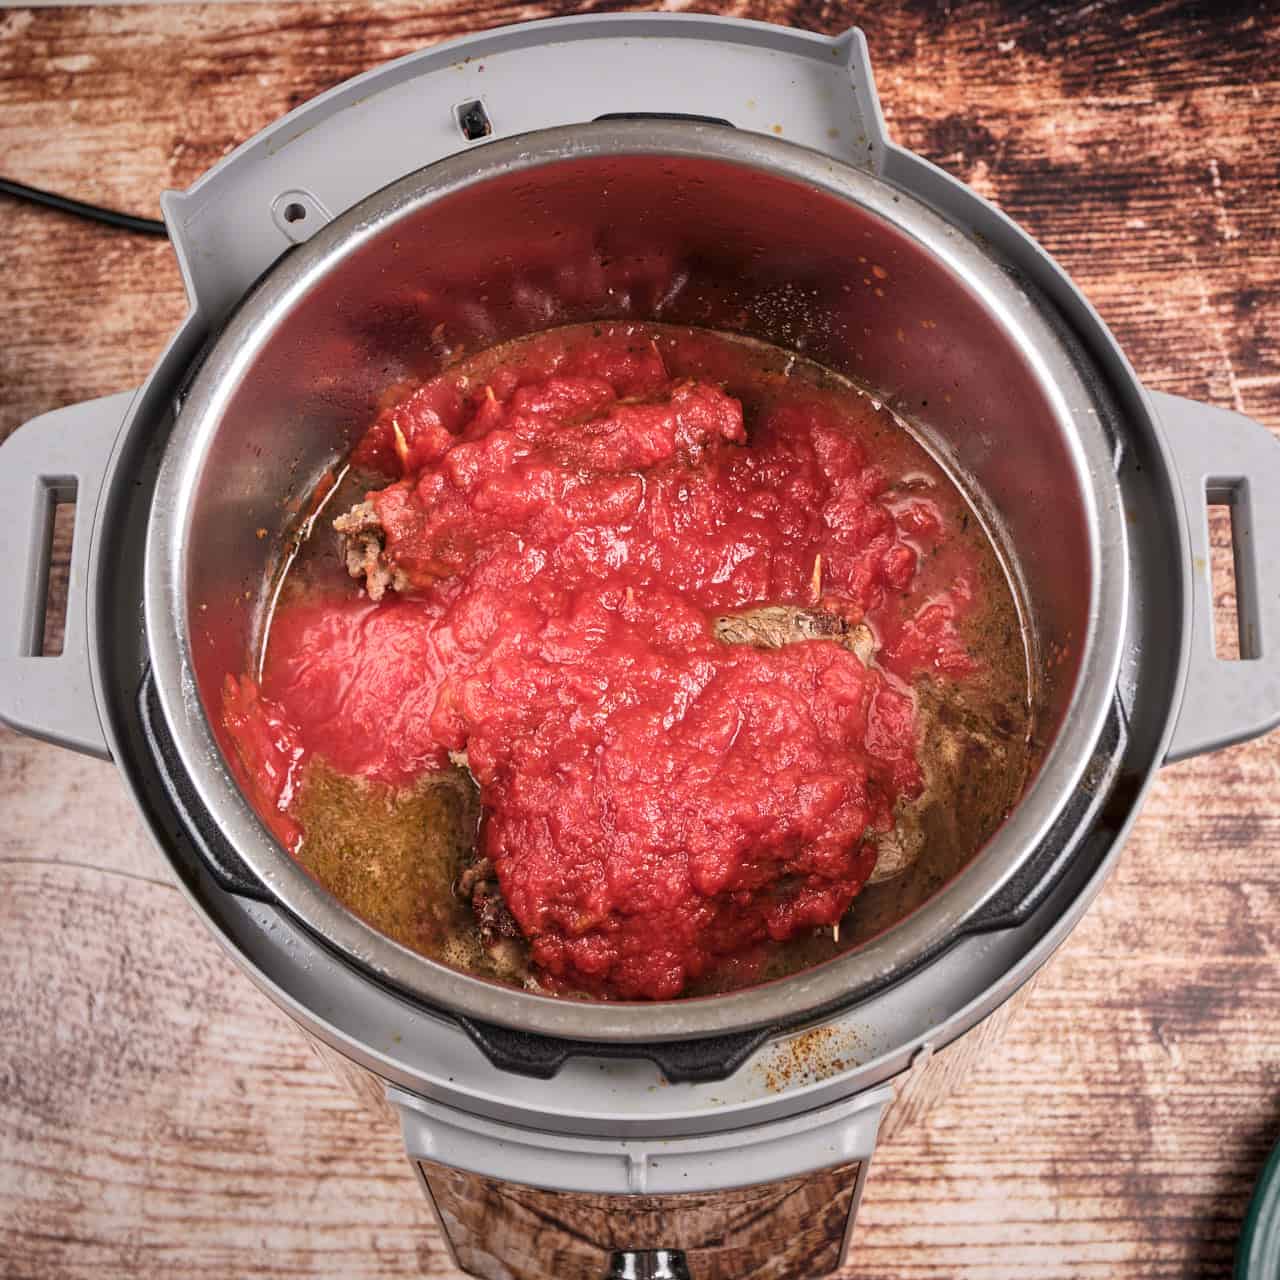 An instant pot full of beef braciole ingredients, ready to lock the lid